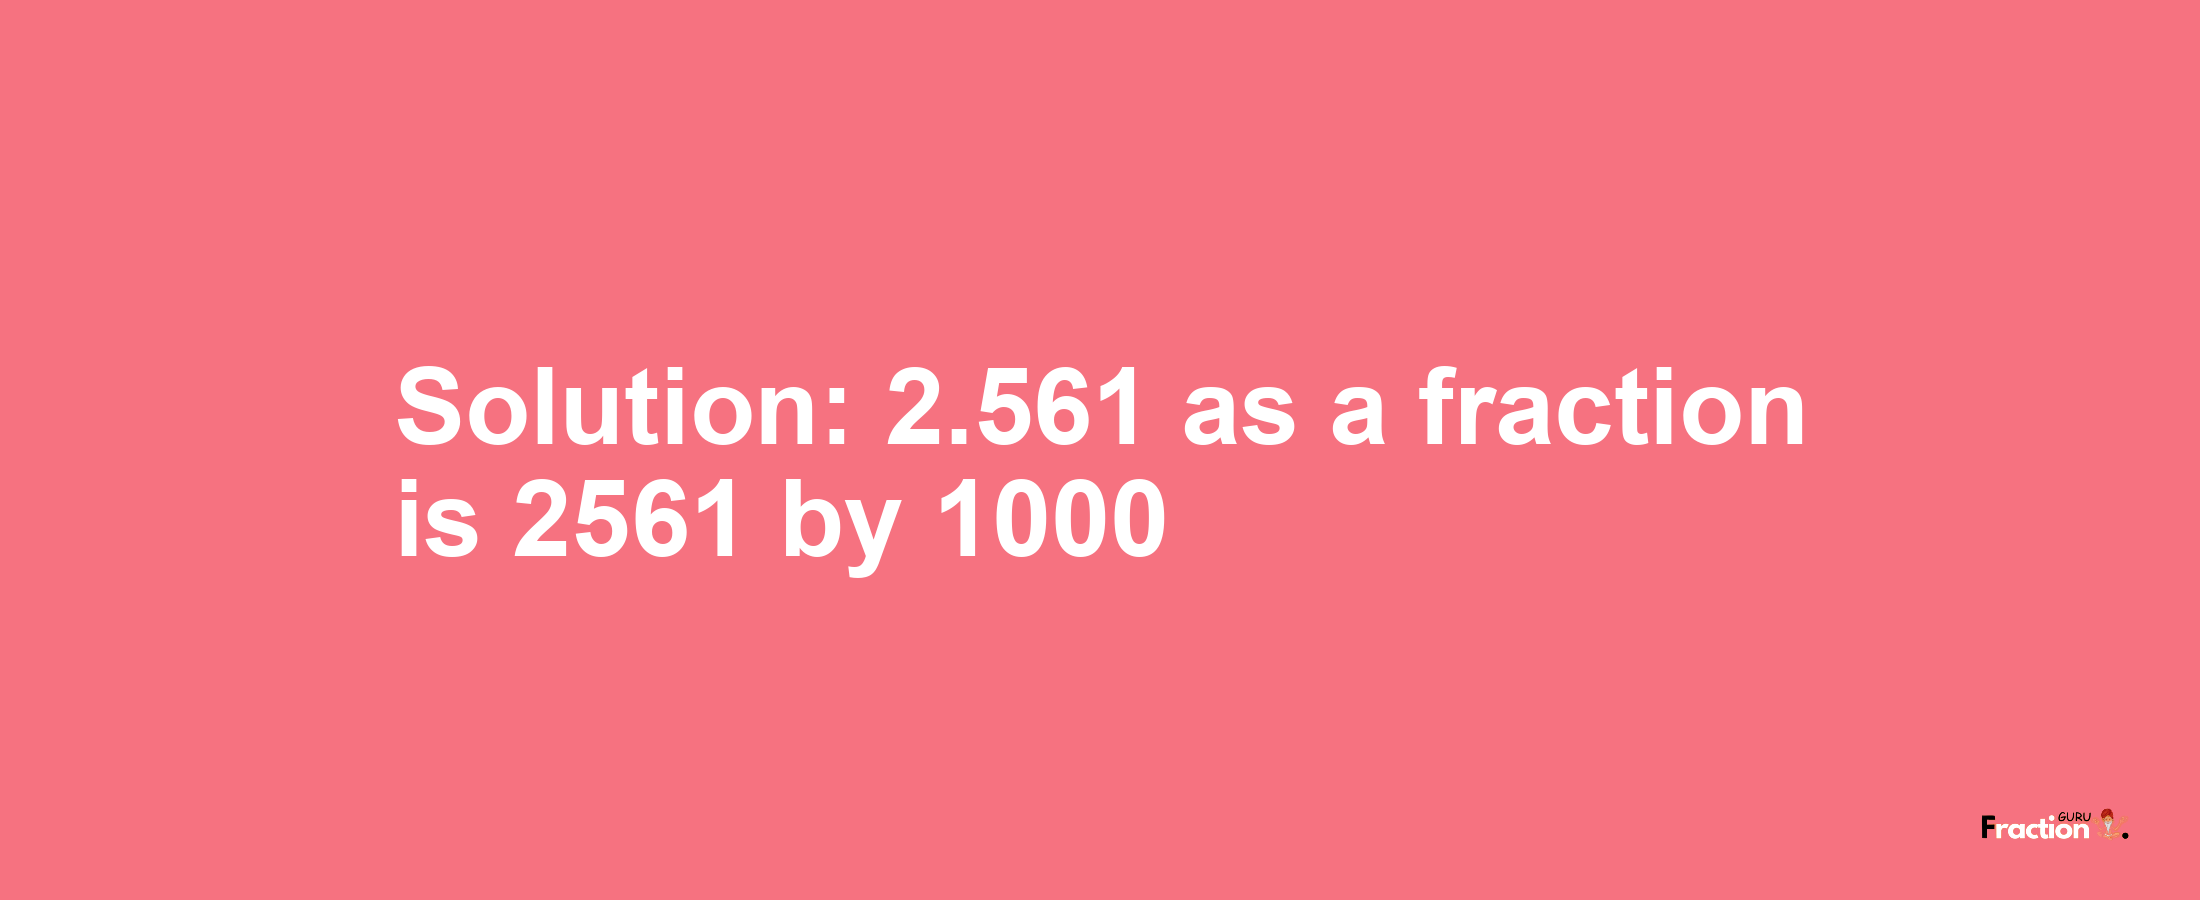 Solution:2.561 as a fraction is 2561/1000